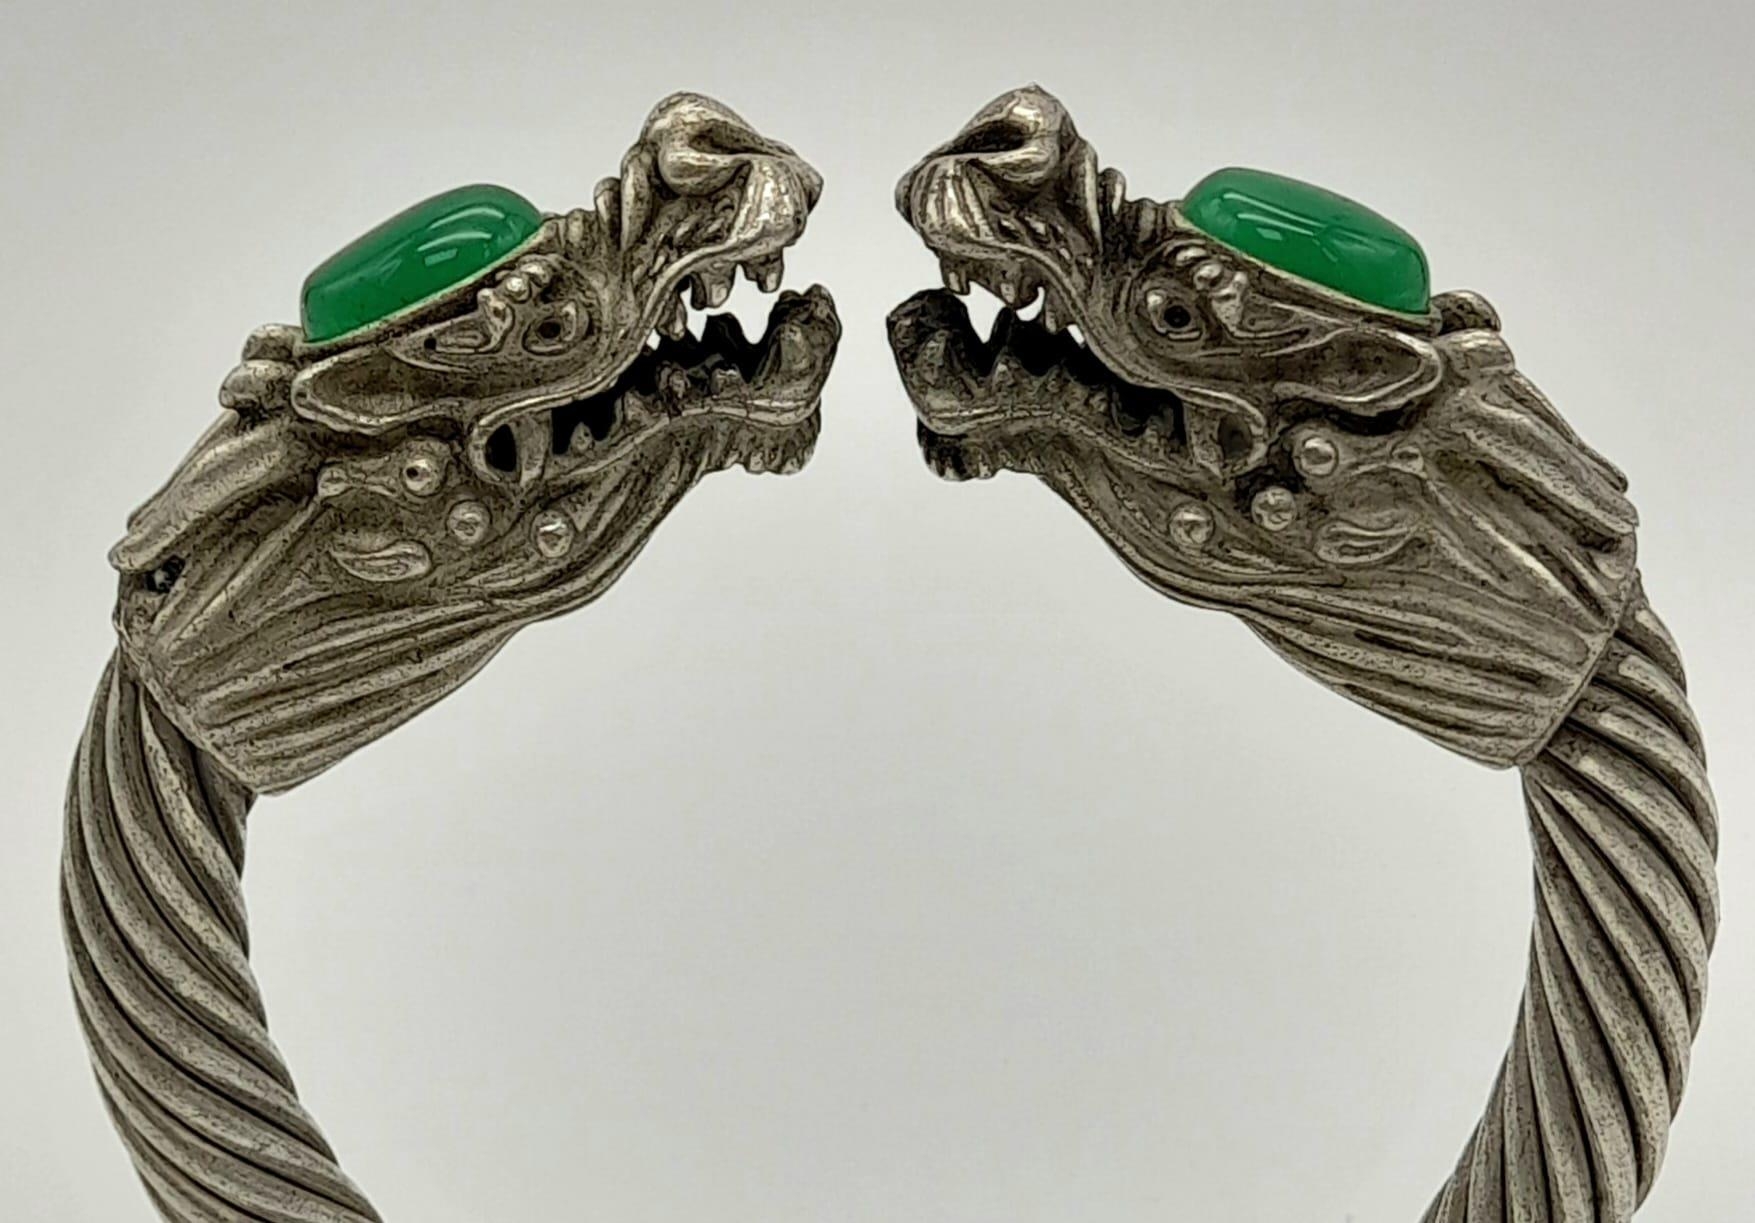 A Tibetan Silver Twin Dragon Twisted Bangle/Bracelet with Green Jade head decoration. 7cm inner - Image 2 of 3